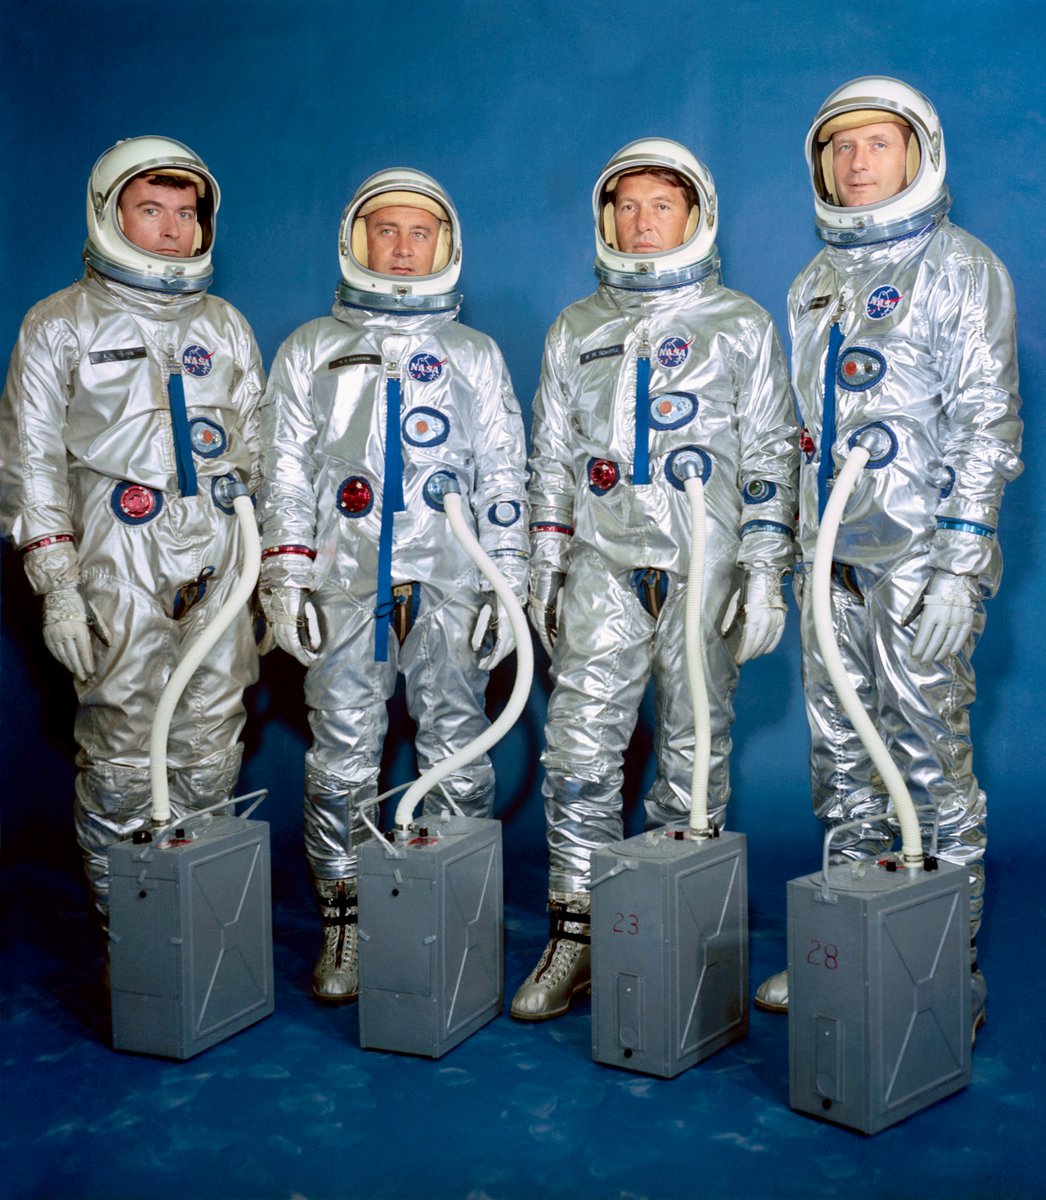 Gemini spacemen John Young, Gus Grissom, Wally Schirra, and Tom Stafford. NASA portrait dated April 13, 1964.